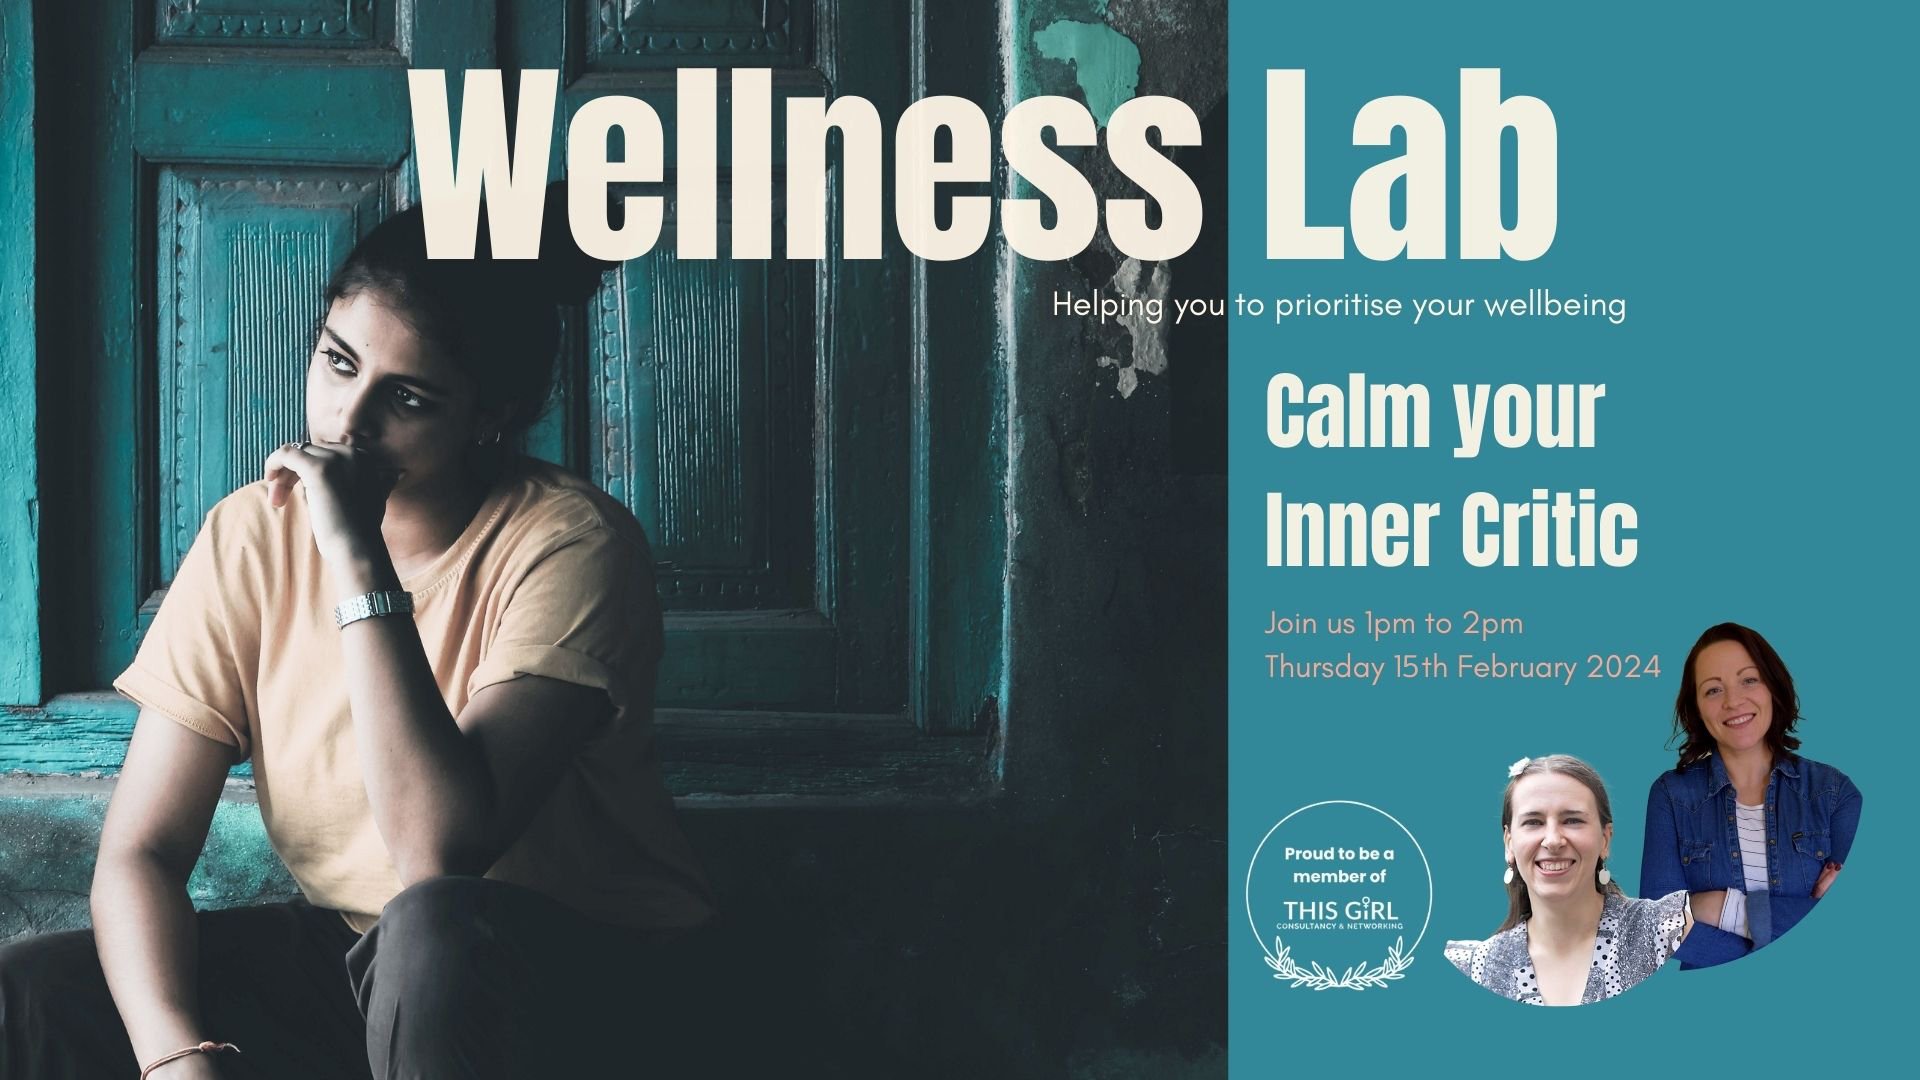 Wellness Lab: Calm your inner critic